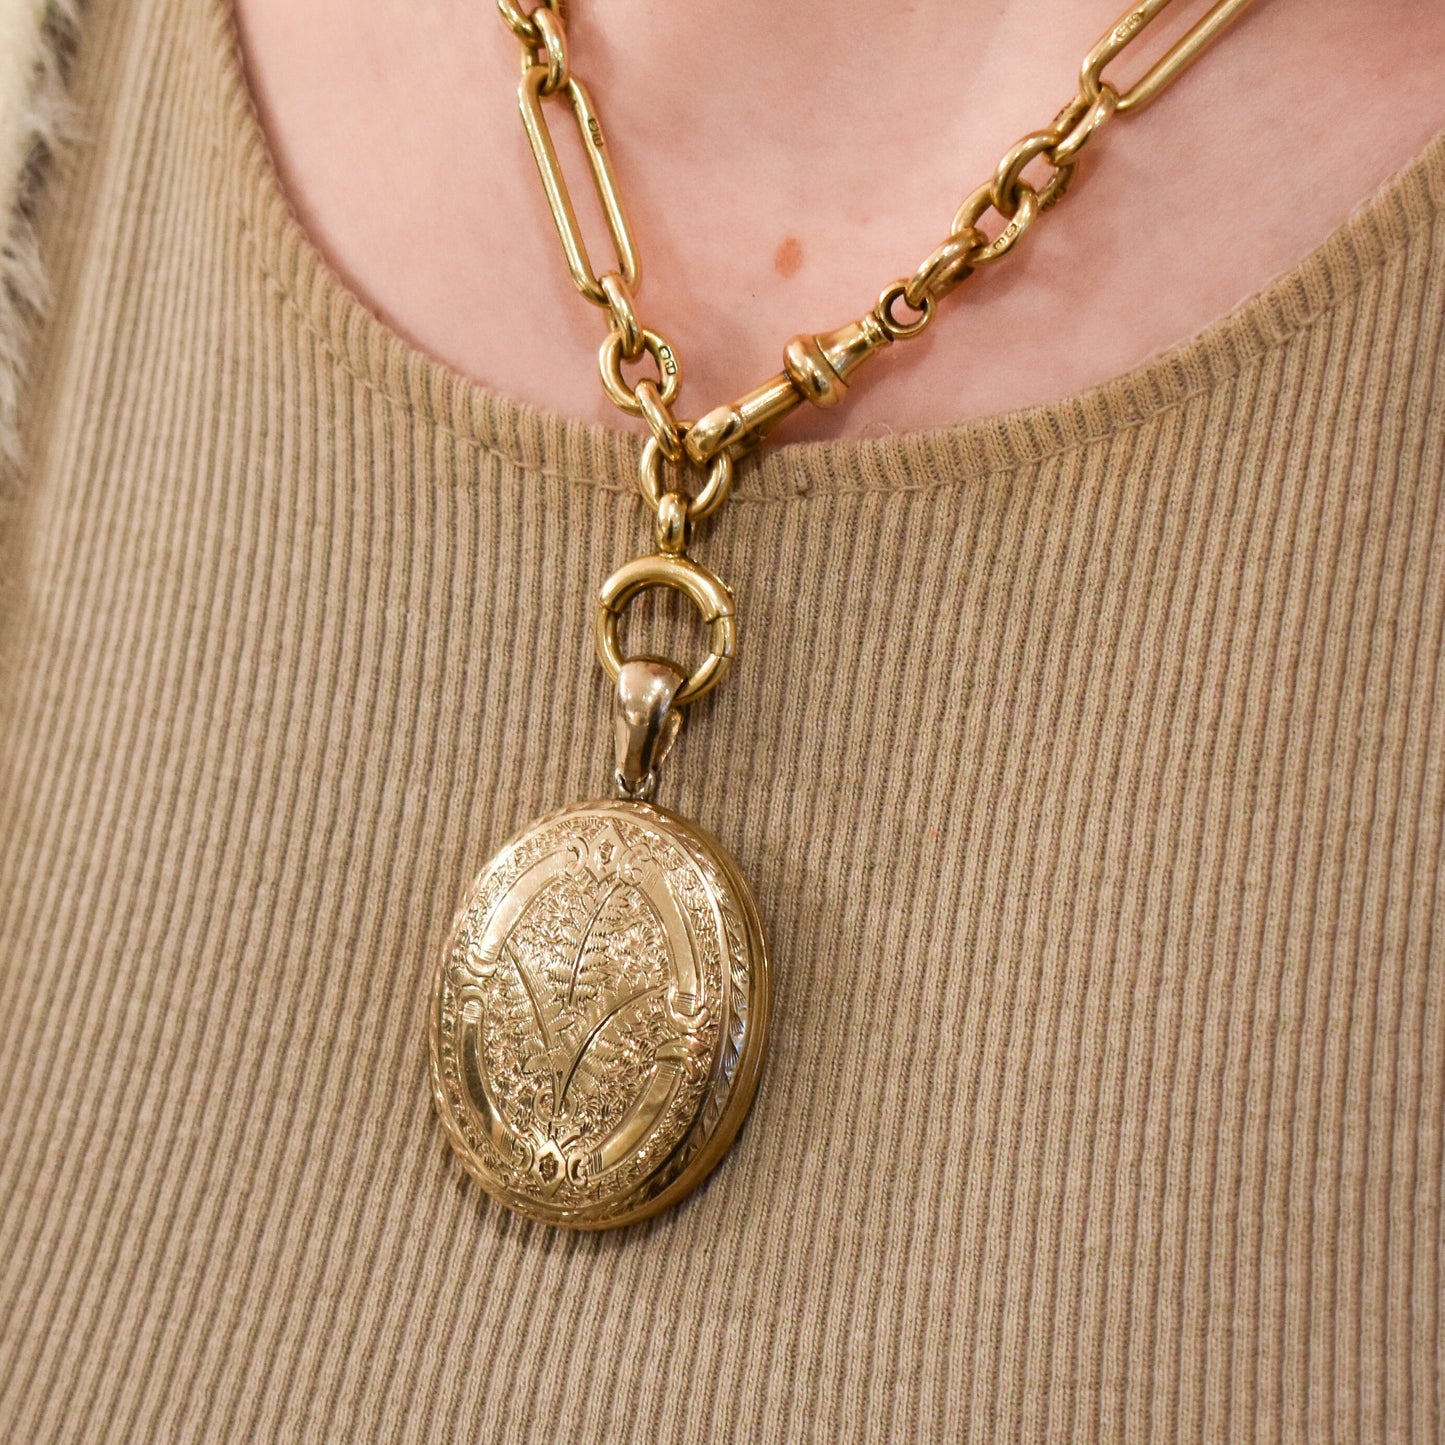 Antique Mourning 9ct Gold Engraved Oval Glass Locket | Victorian